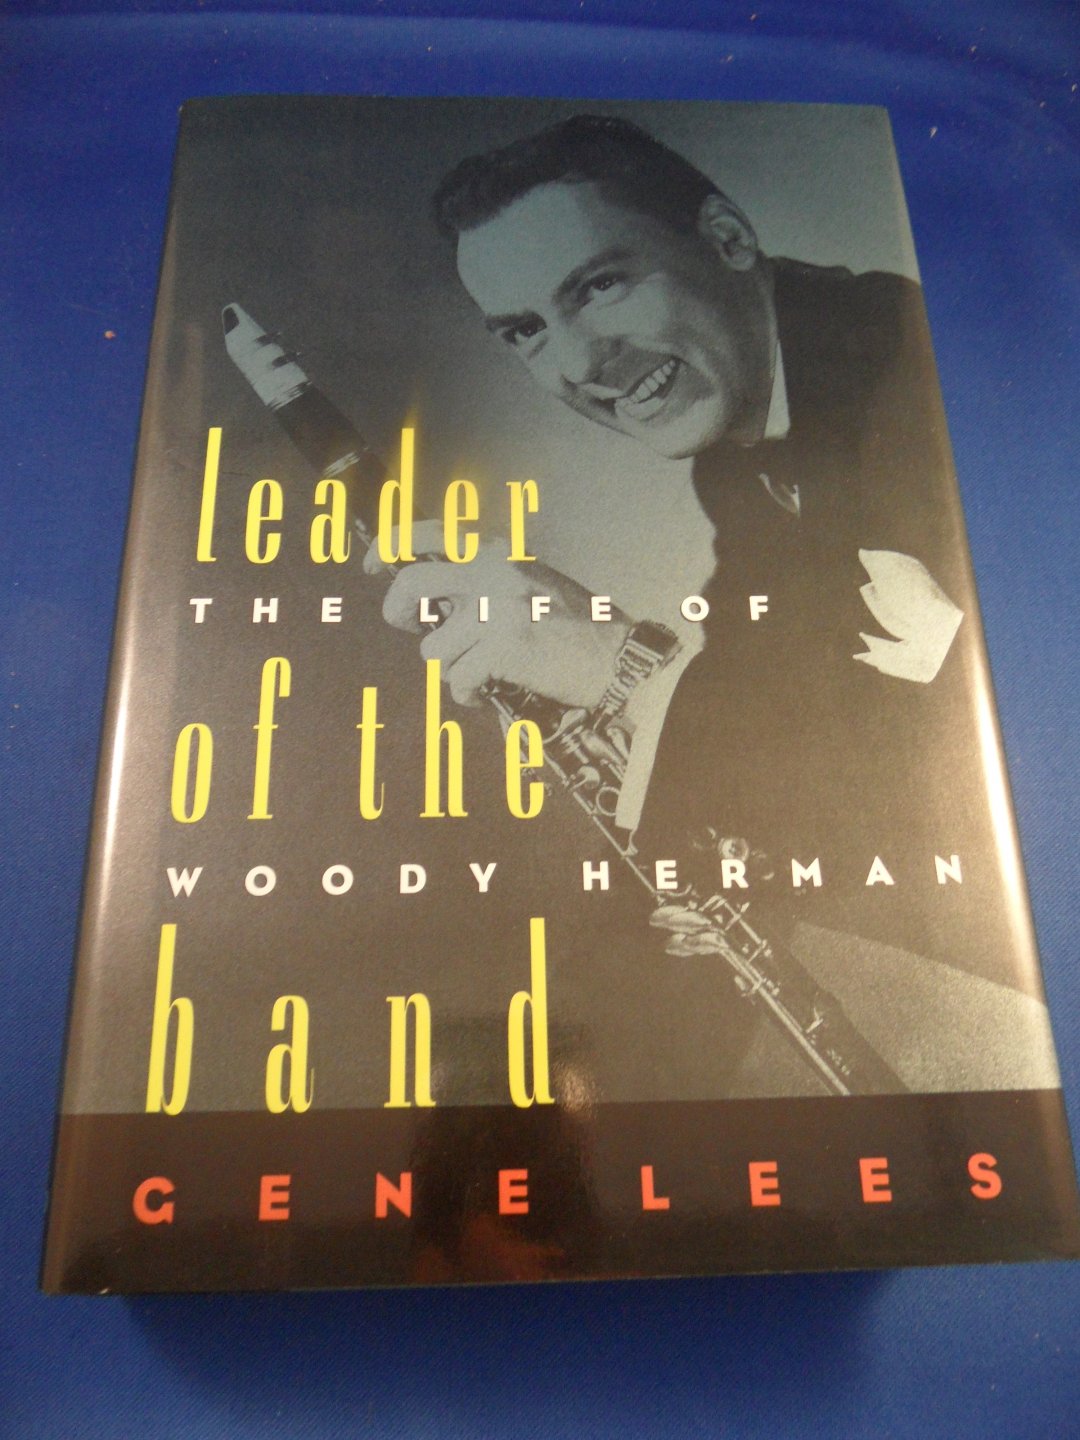 Lees, Gene - Leader of the band. The life of Woody Herman